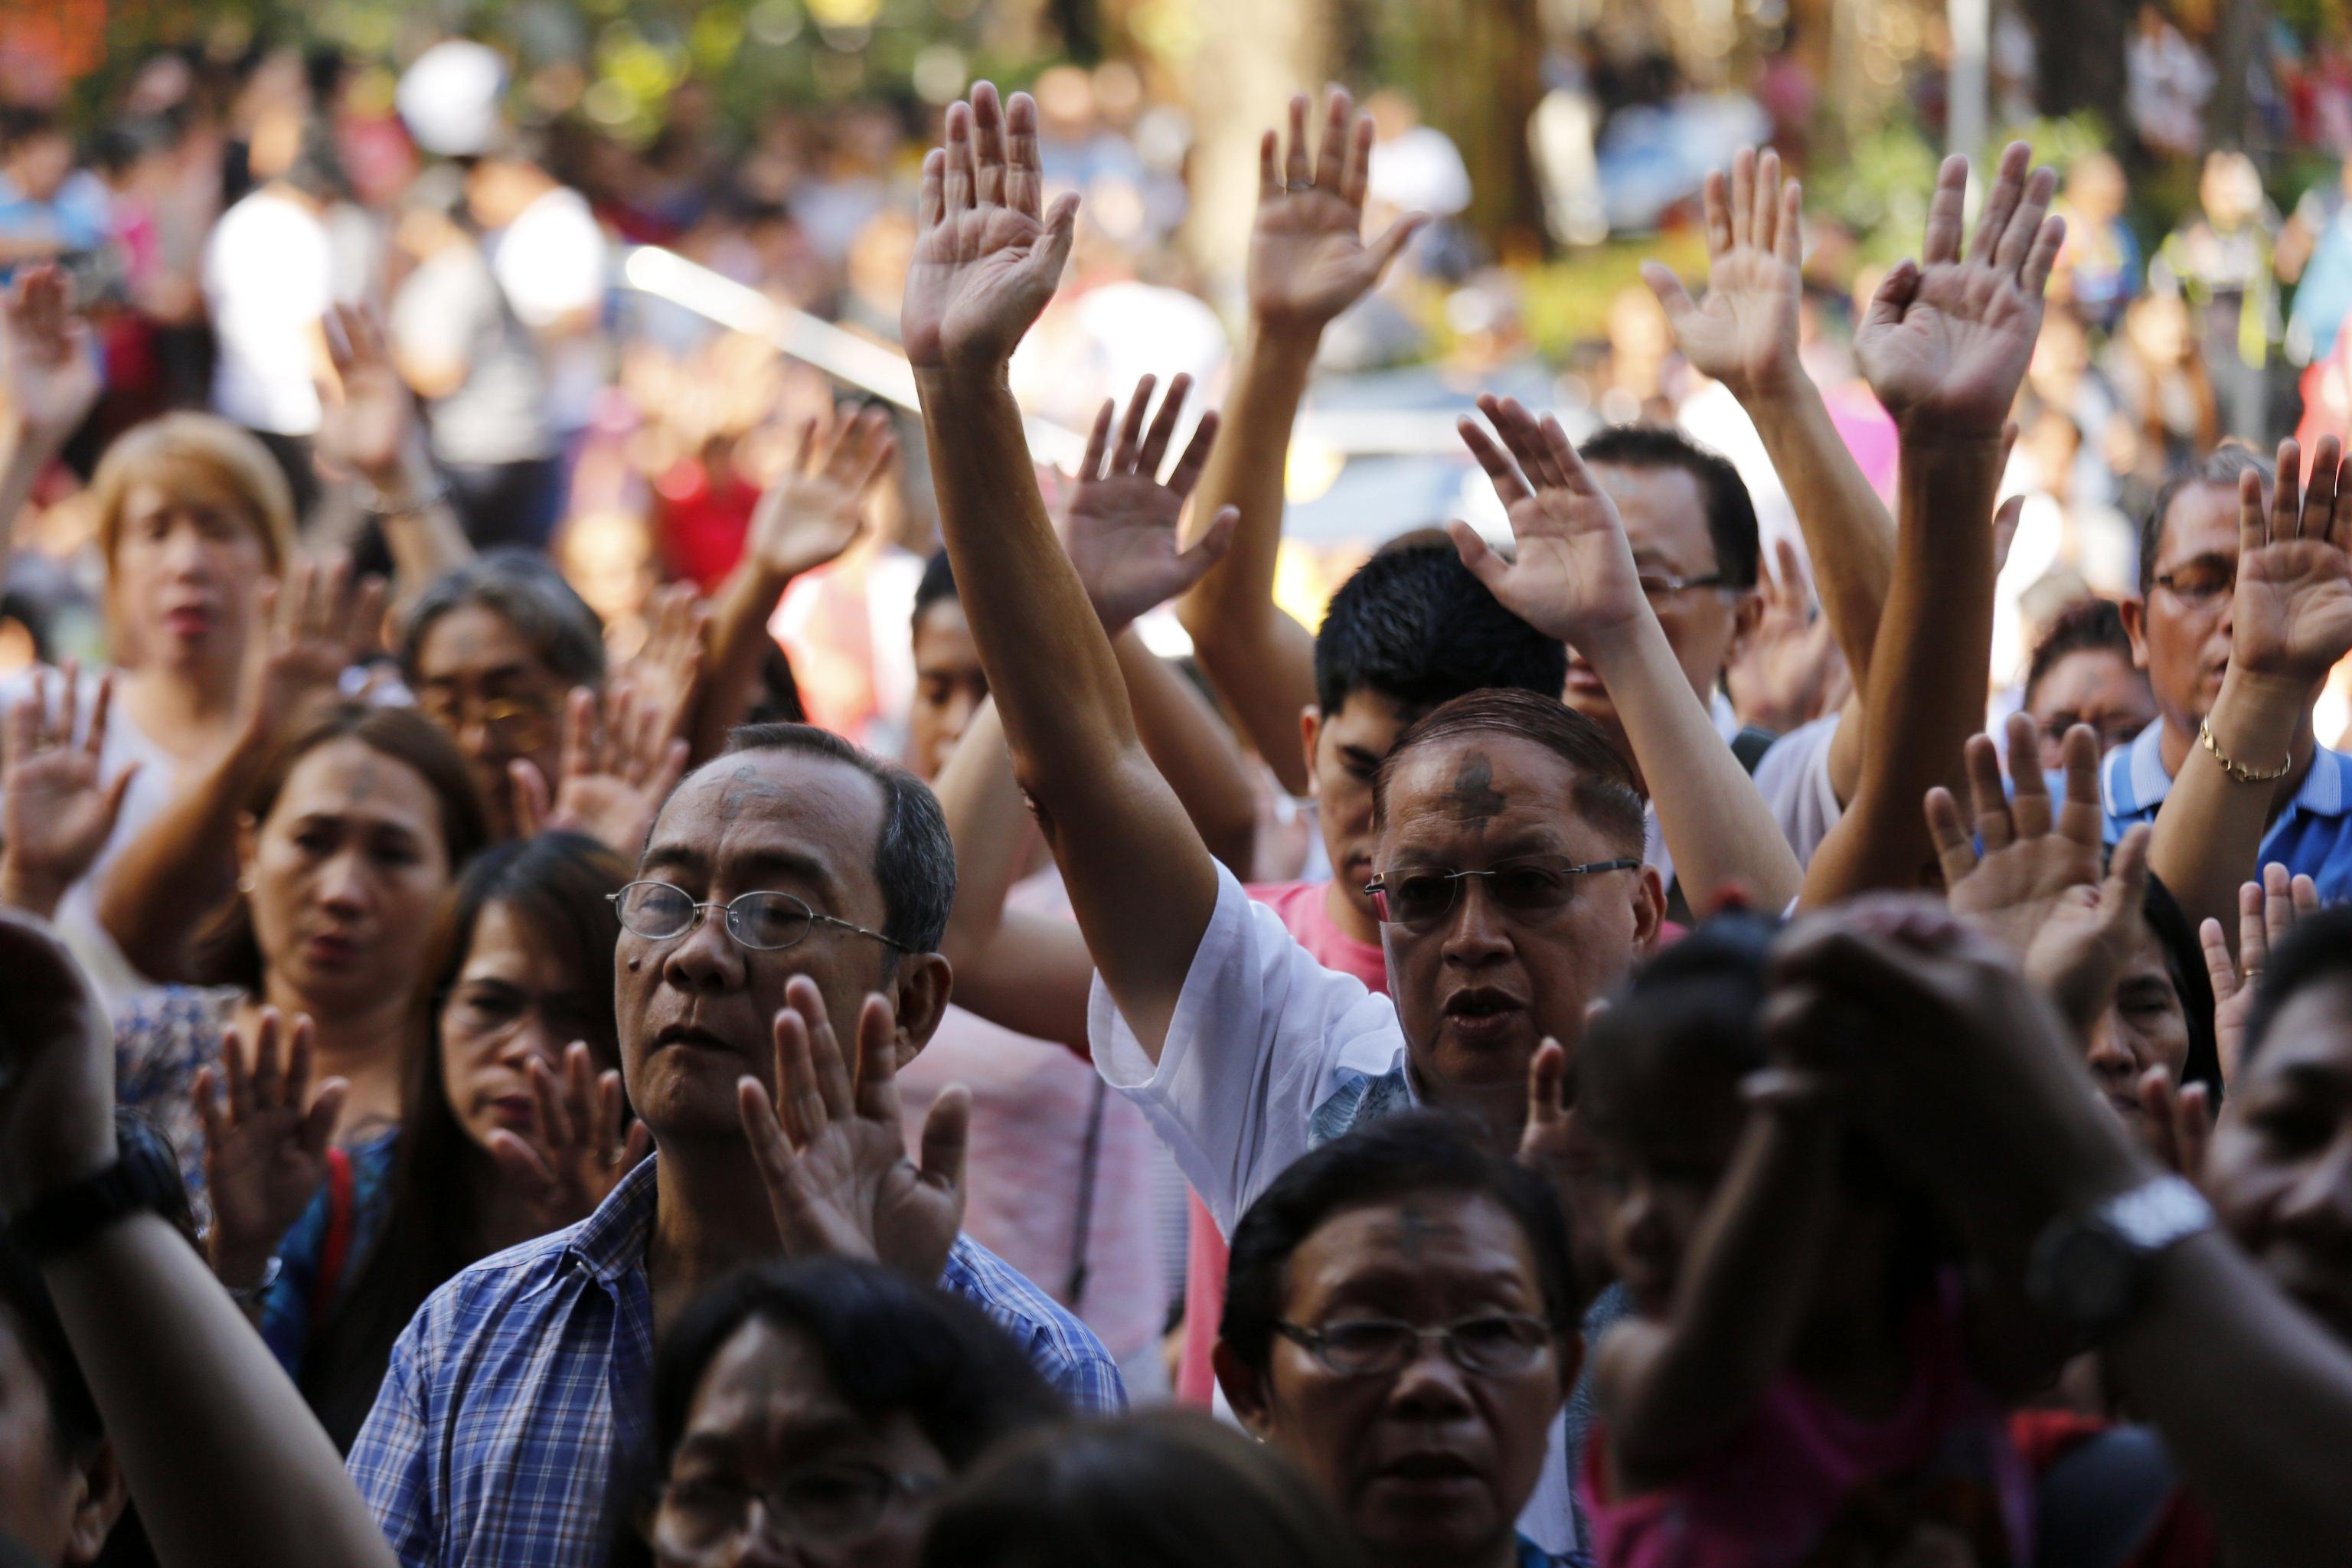 epa05822040 Filipinos with cross markings on their forehead attend a Holy Mass at a church during Ash Wednesday in Pasay city, south of Manila, Philippines, 01 March 2017. Filipino Catholic started the 40-day Lenten Season on Ash Wednesday by going to church to have their forehead marked with an ash cross sign. The rite is part of the culture of many Filipino Catholics, symbolizing their acceptance for the start of Lent and to show their sincere efforts and discipline to cleanse their lives of sin through prayers.  EPA/FRANCIS R. MALASIG